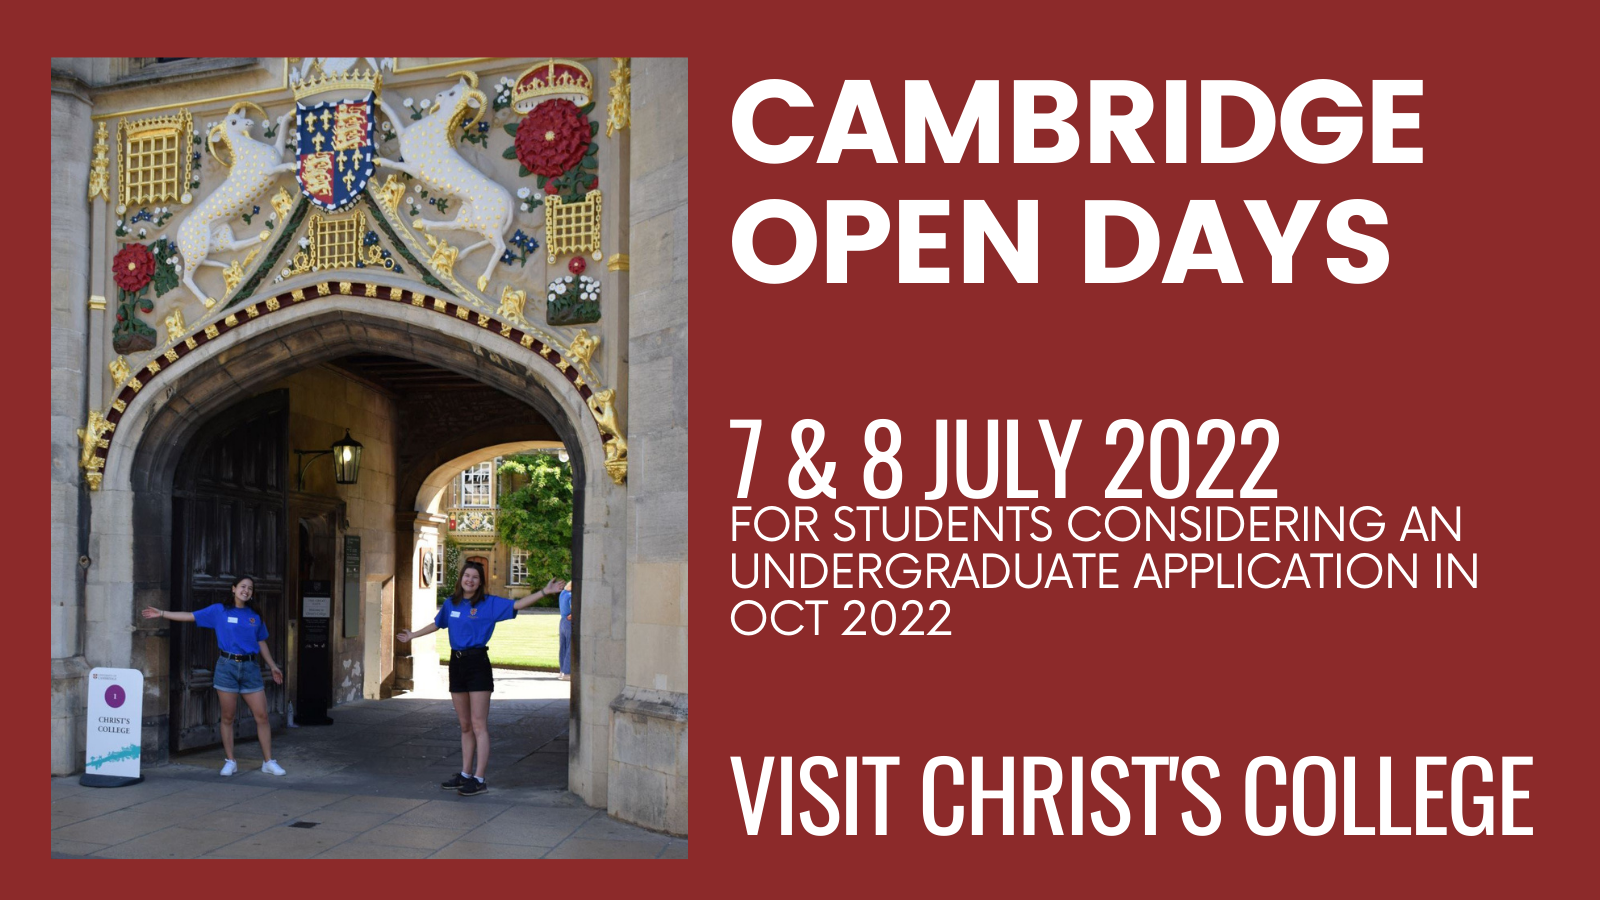 Cambridge Open Days poster showing students at the main gate